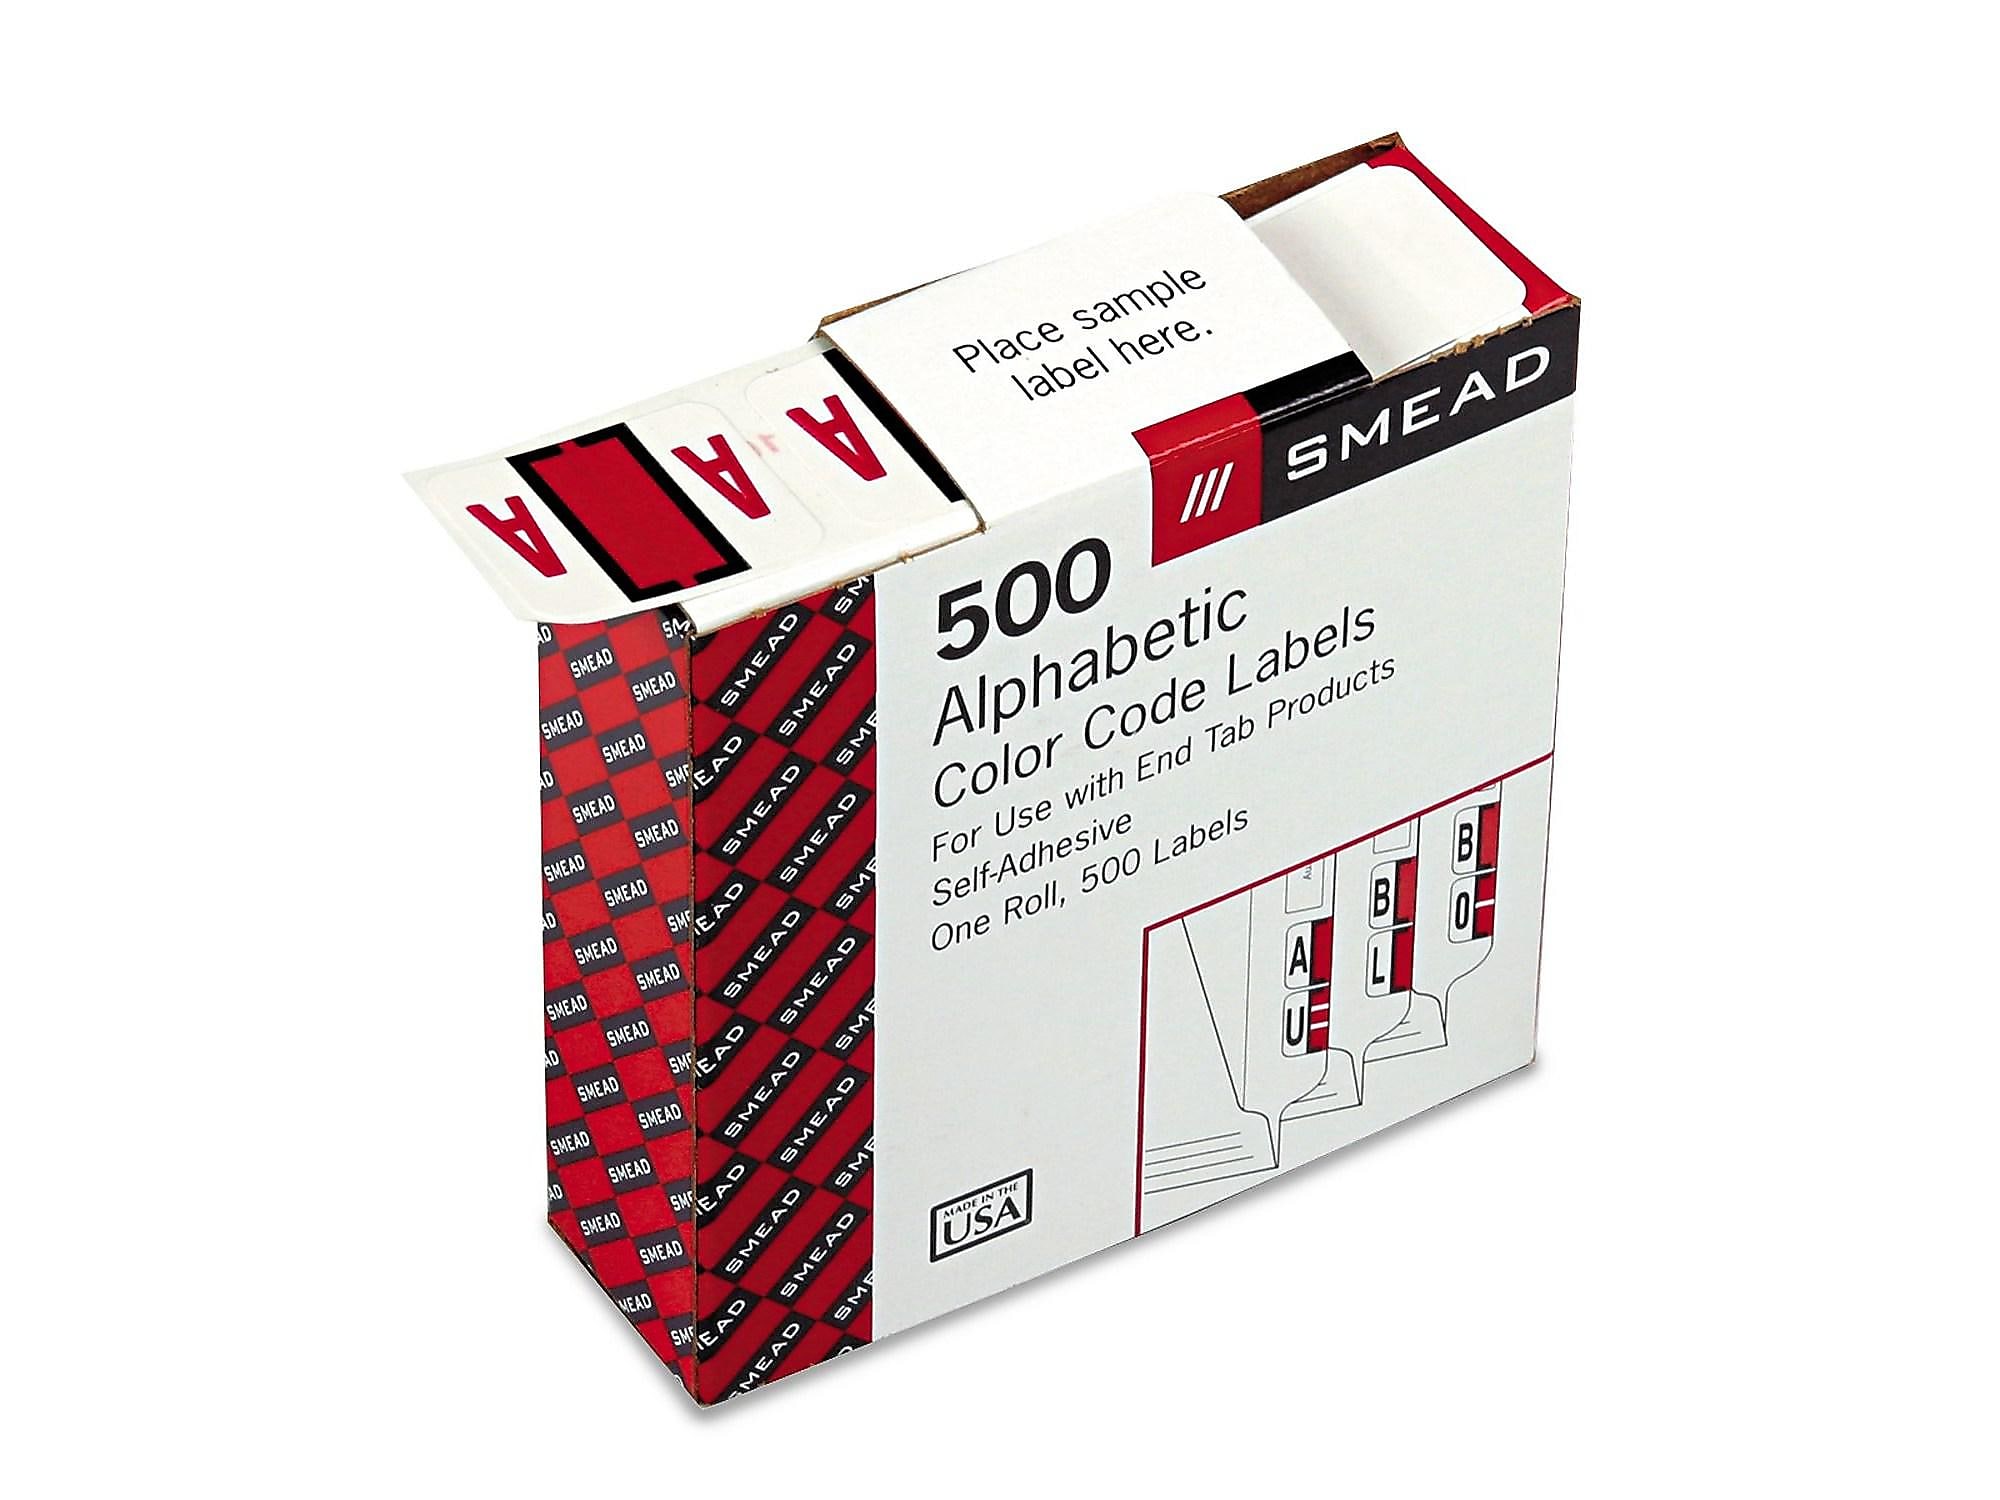 Smead 67071 A-Z Color-Coded Bar-Style End Tab Labels, Letter A, Red, 500/Roll - image 3 of 3